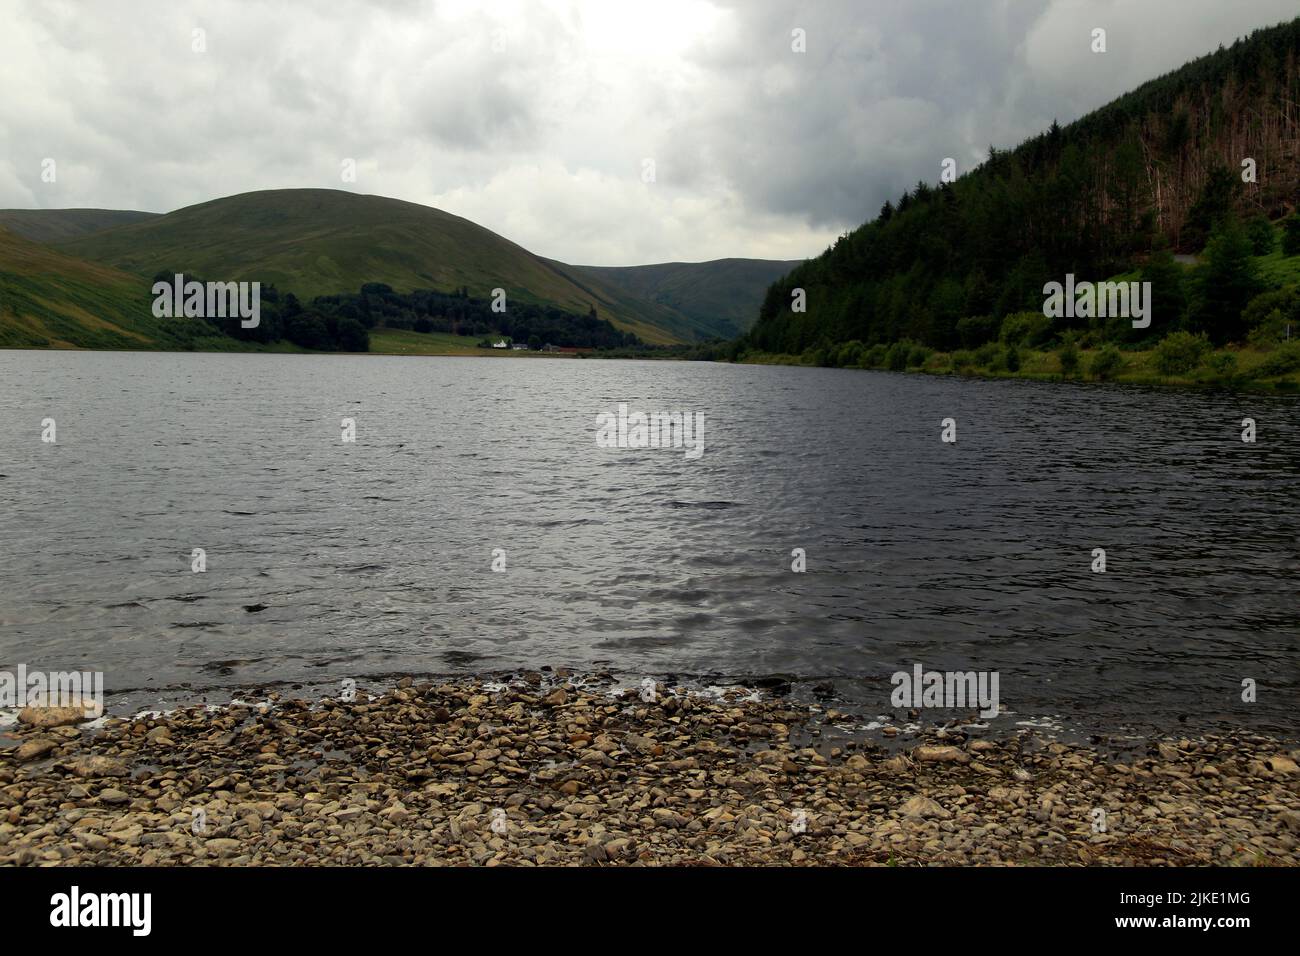 St Mary's Loch, a freshwater loch in the Scottish Borders, between Selkirk and Moffat, Scotland, UK Stock Photo